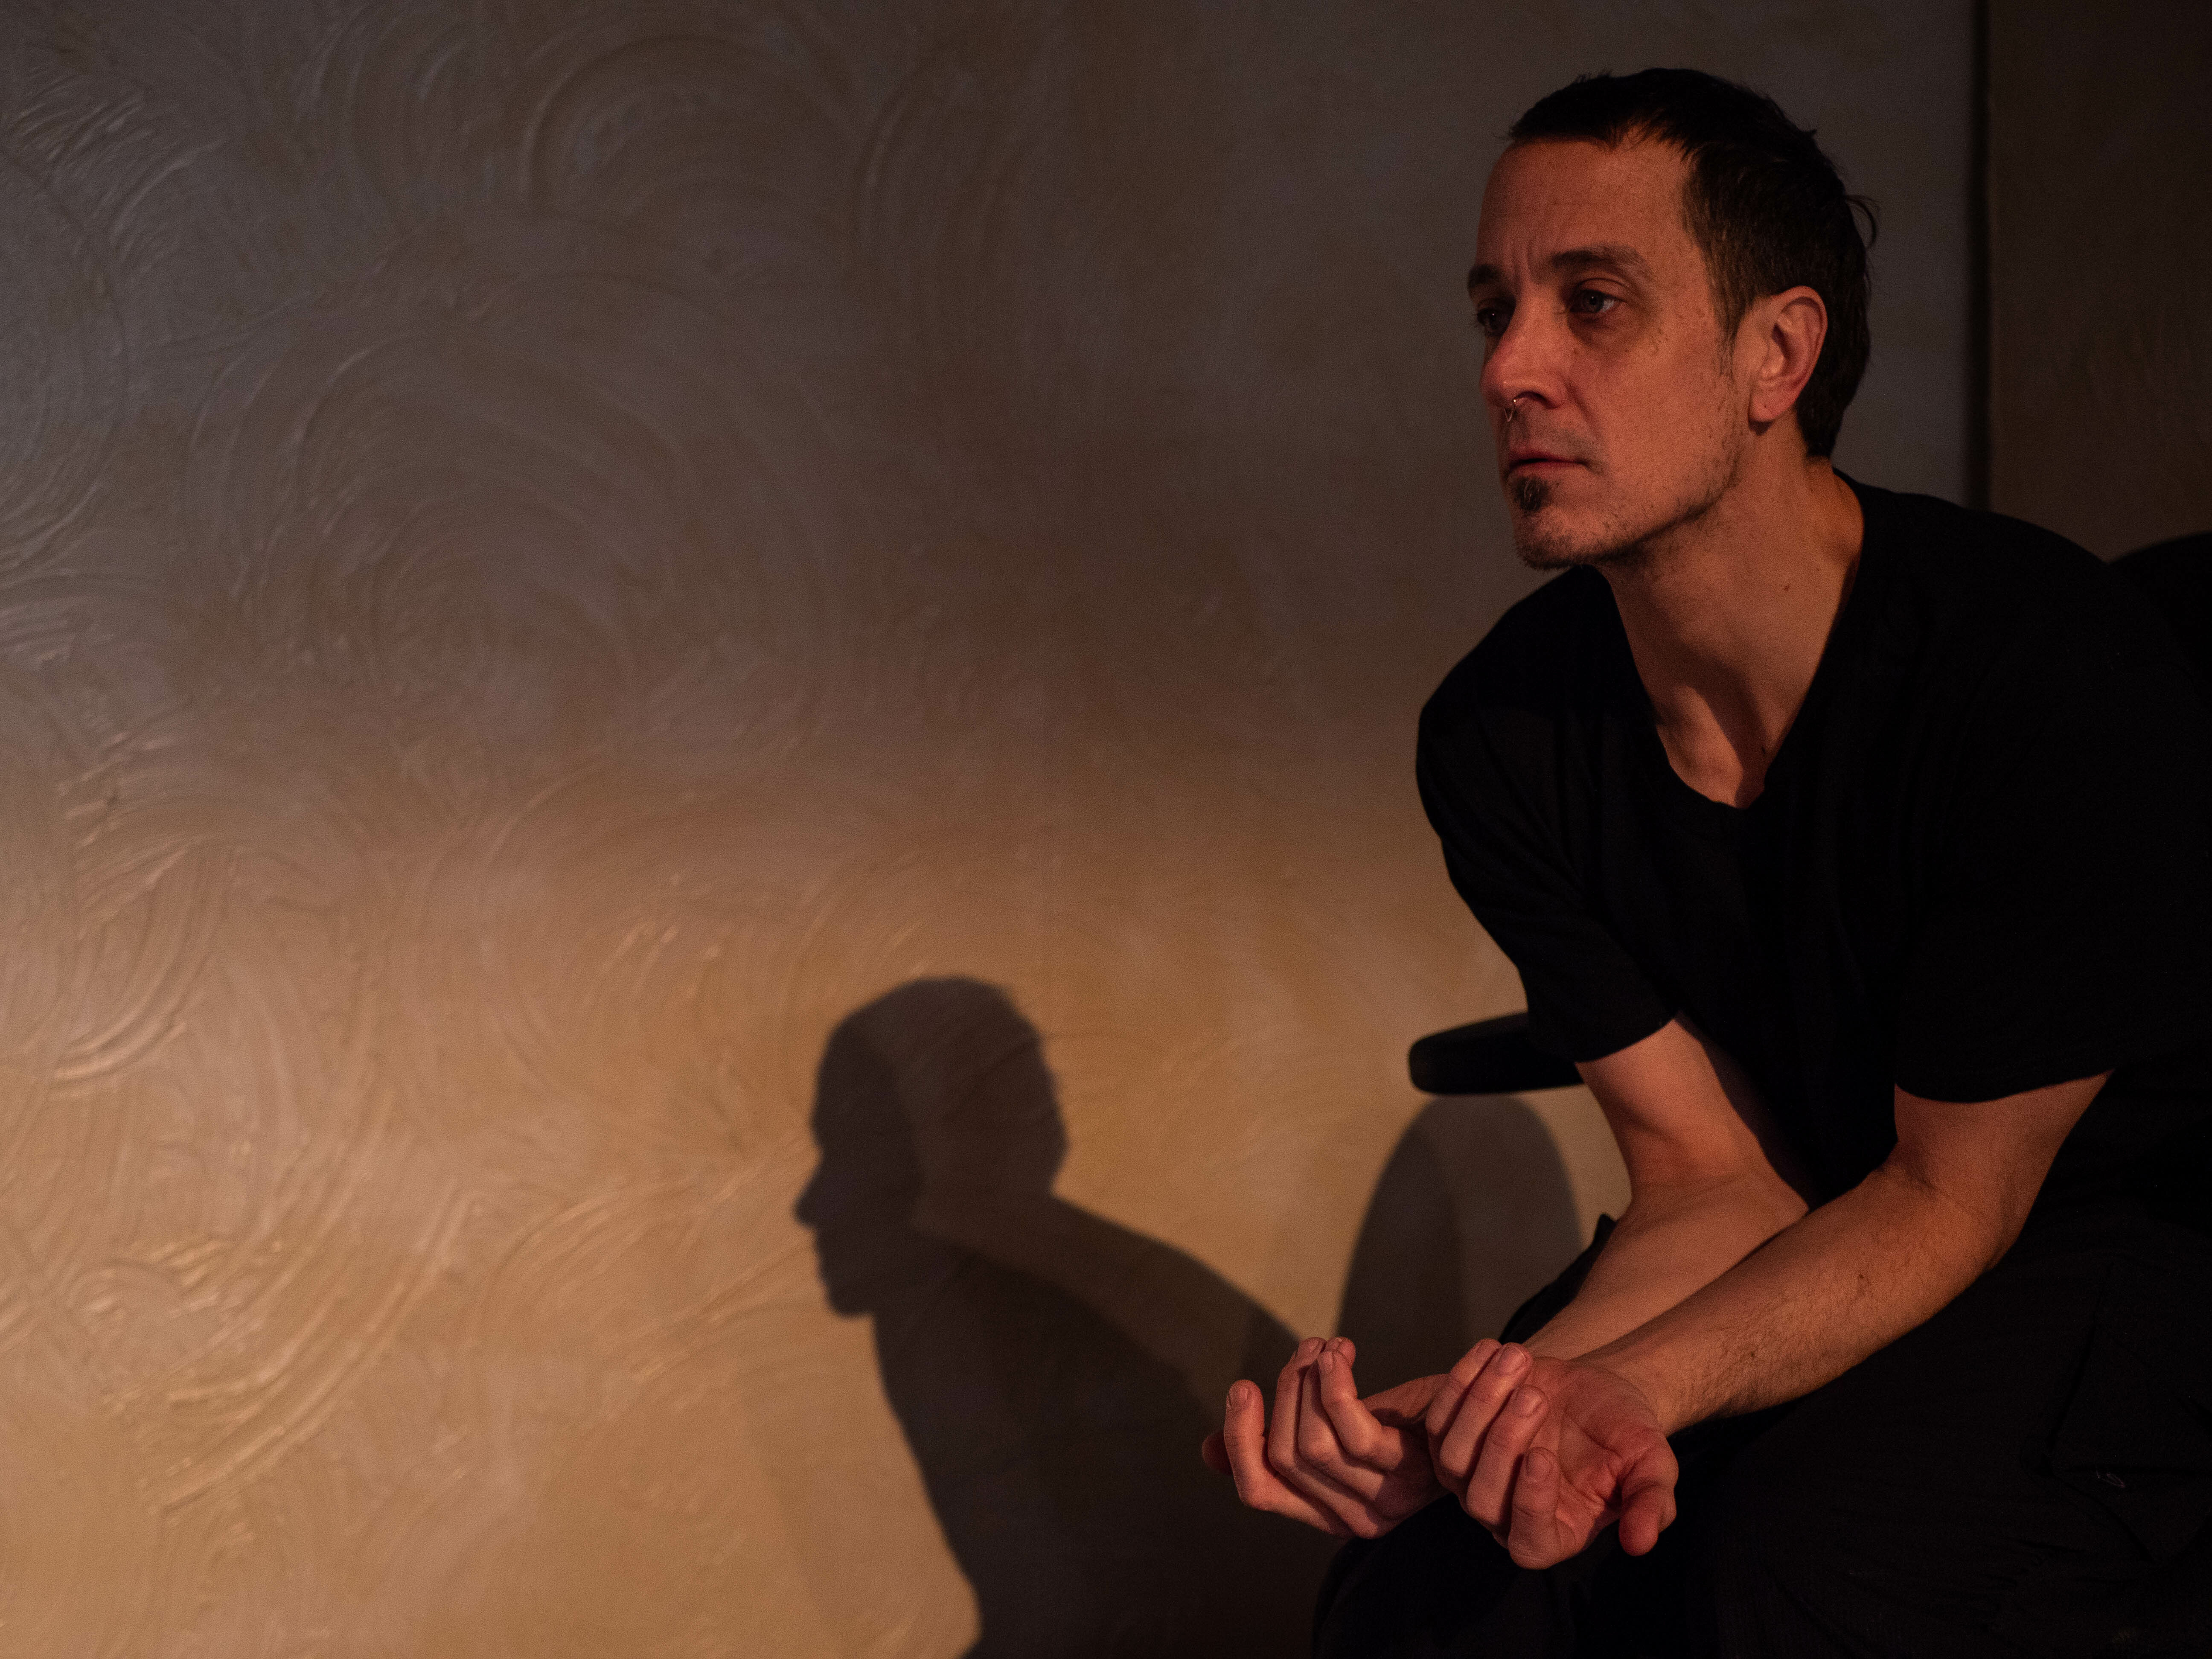 Lit by dark, glowing light, a dancer is hunched over, arms bent in front. They are dressed in a black shirt and their shadow shows behind them.